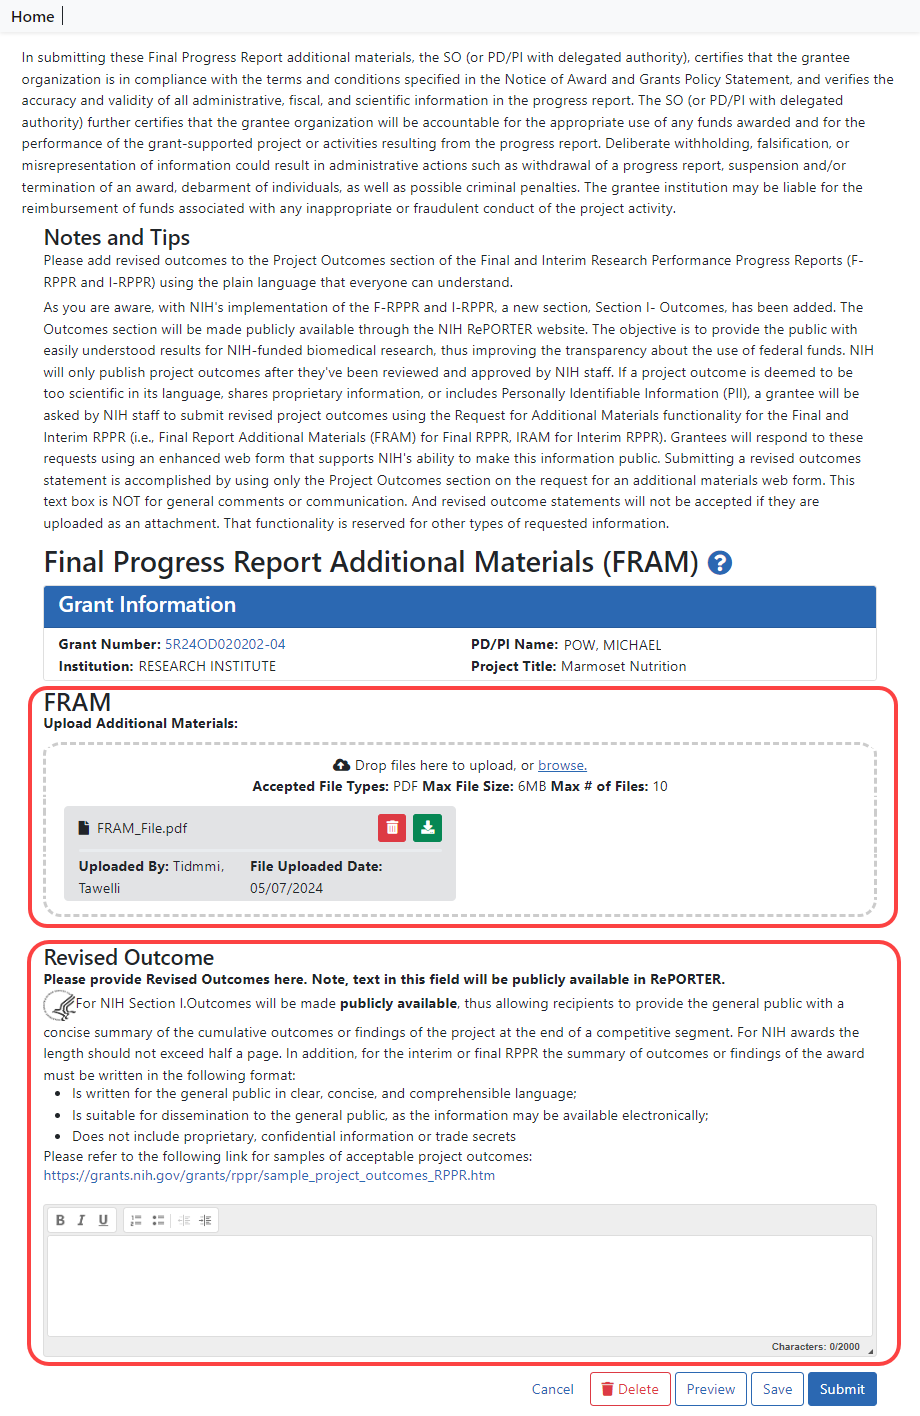 The FRAM screen contains two distinct sections where material can be submitted, a section for uploading files, and a section for providing a revised outcome